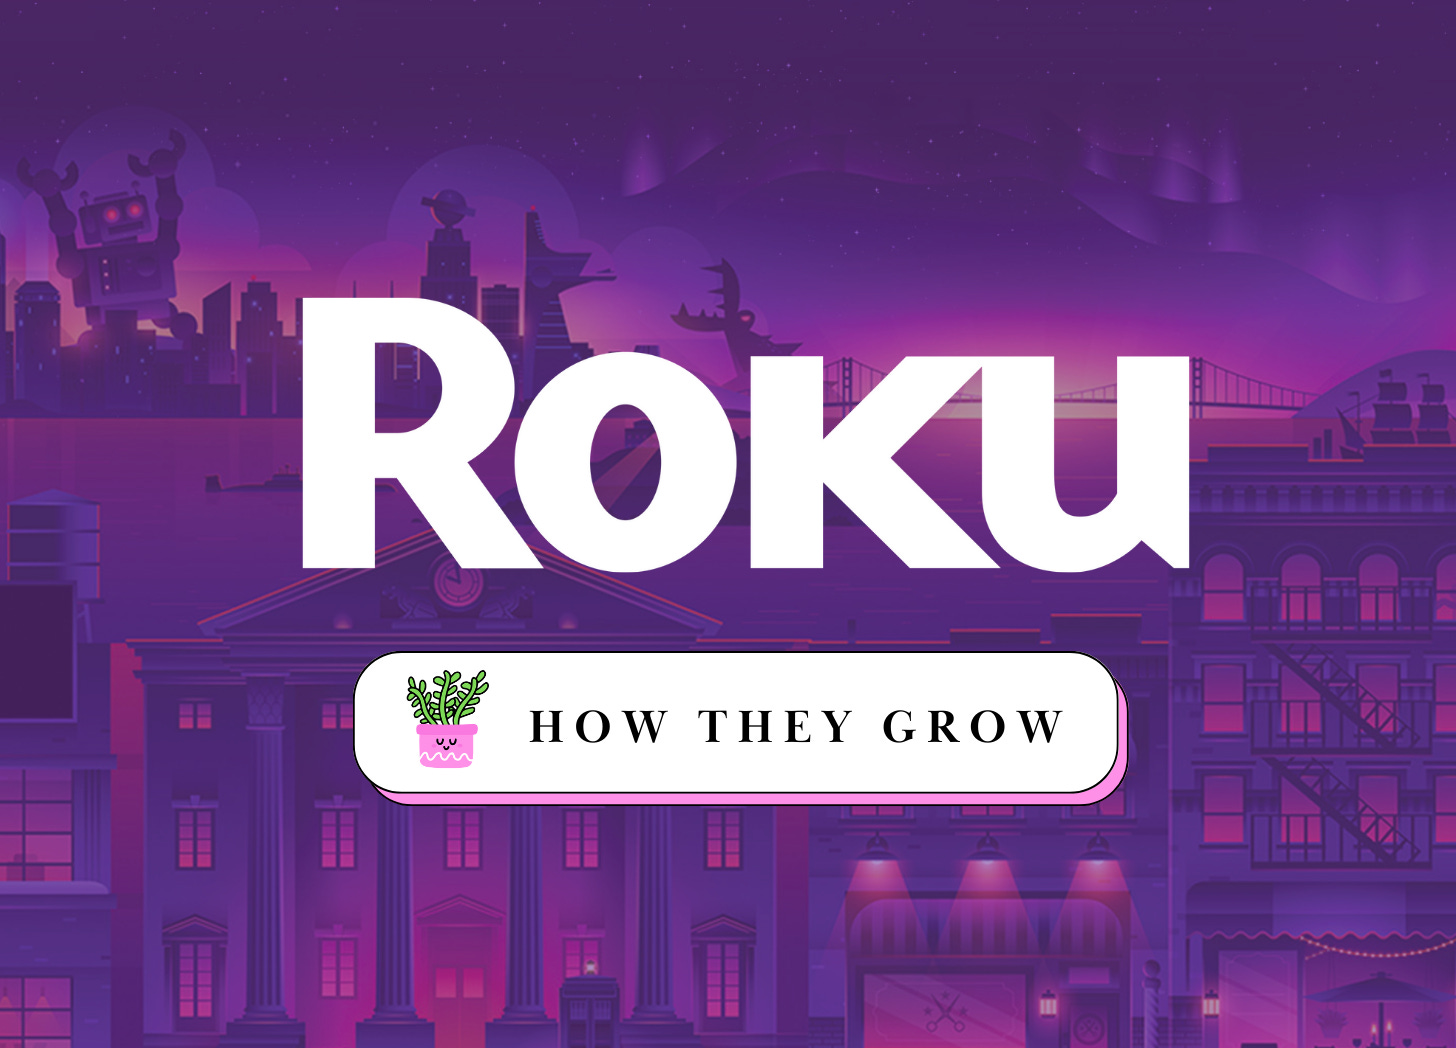 Roku Products